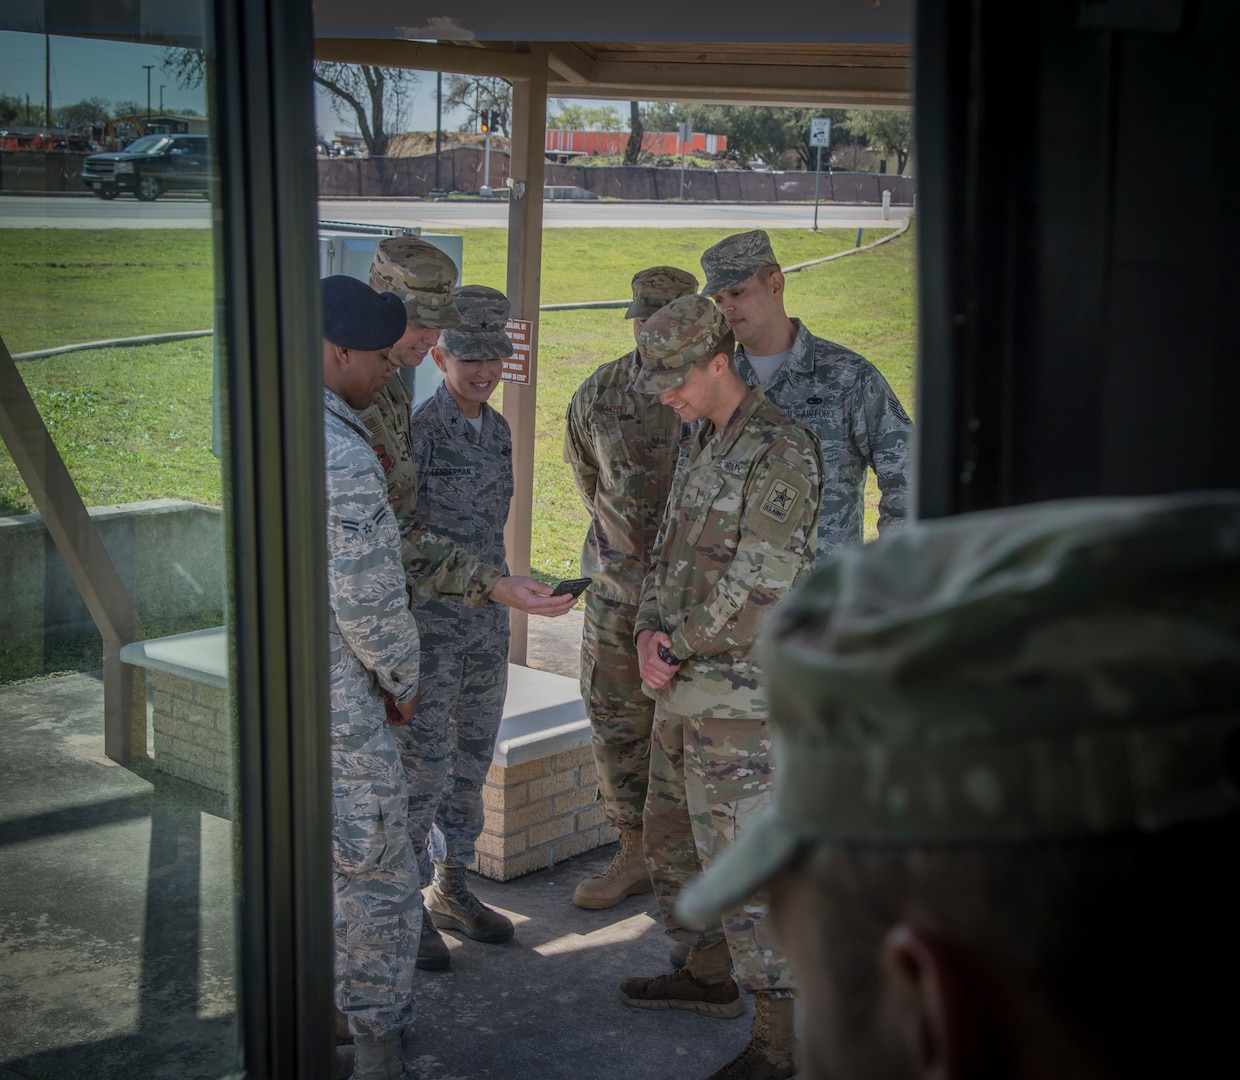 Chief Master Sgt. Christopher Lantange, Joint Base San Antonio command chief, showcases the “Ride Systems” application for JBSA shuttles to Brig. Gen. Laura Lenderman, 502d Air Base Wing and JBSA commander and other uniformed members at a JBSA-Lackland bus stop Feb. 20, 2019.  The app includes Global Positioning System tracking capabilities with mapping and coordination with the ground transportation offices to track exactly where each bus is, their route and how long the wait time is.